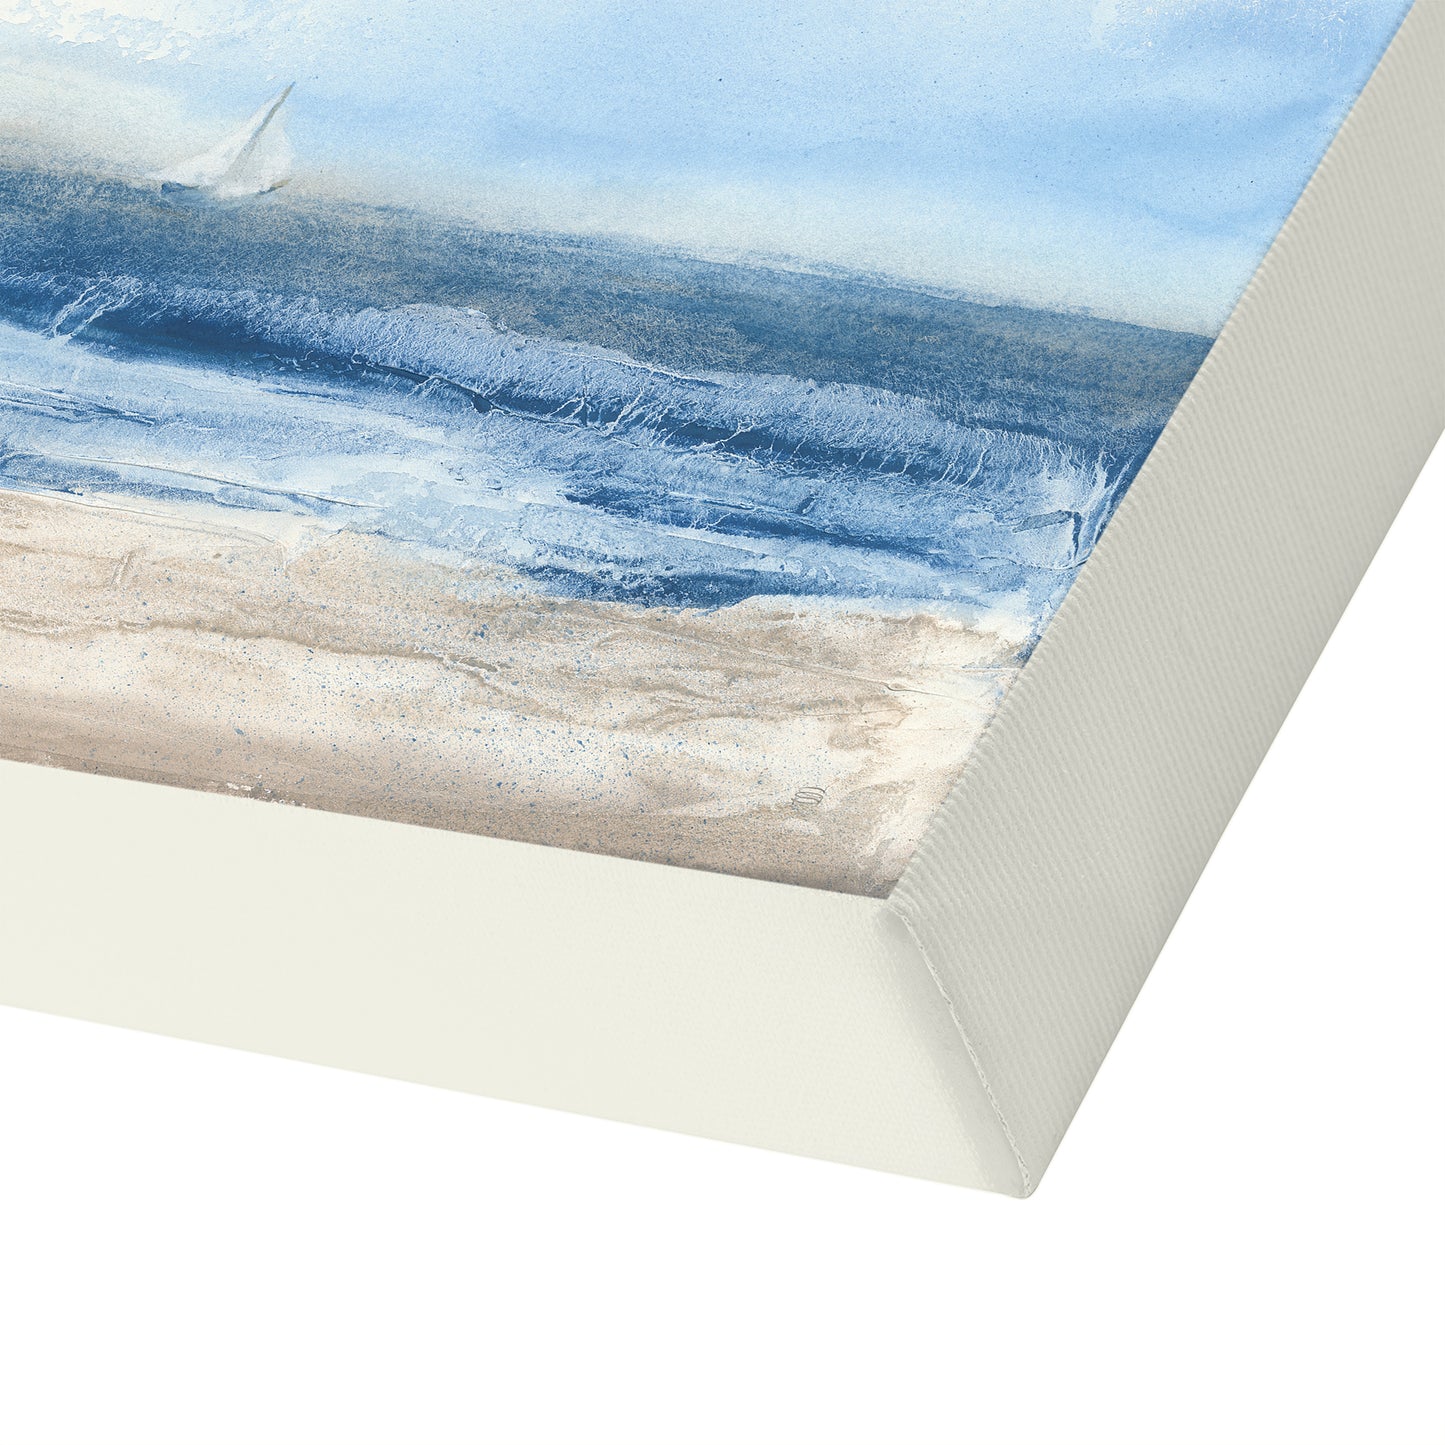 Surf and Sails - 2 Piece Gallery Wrapped Canvas Set by Chris Paschke - Art Set - Americanflat